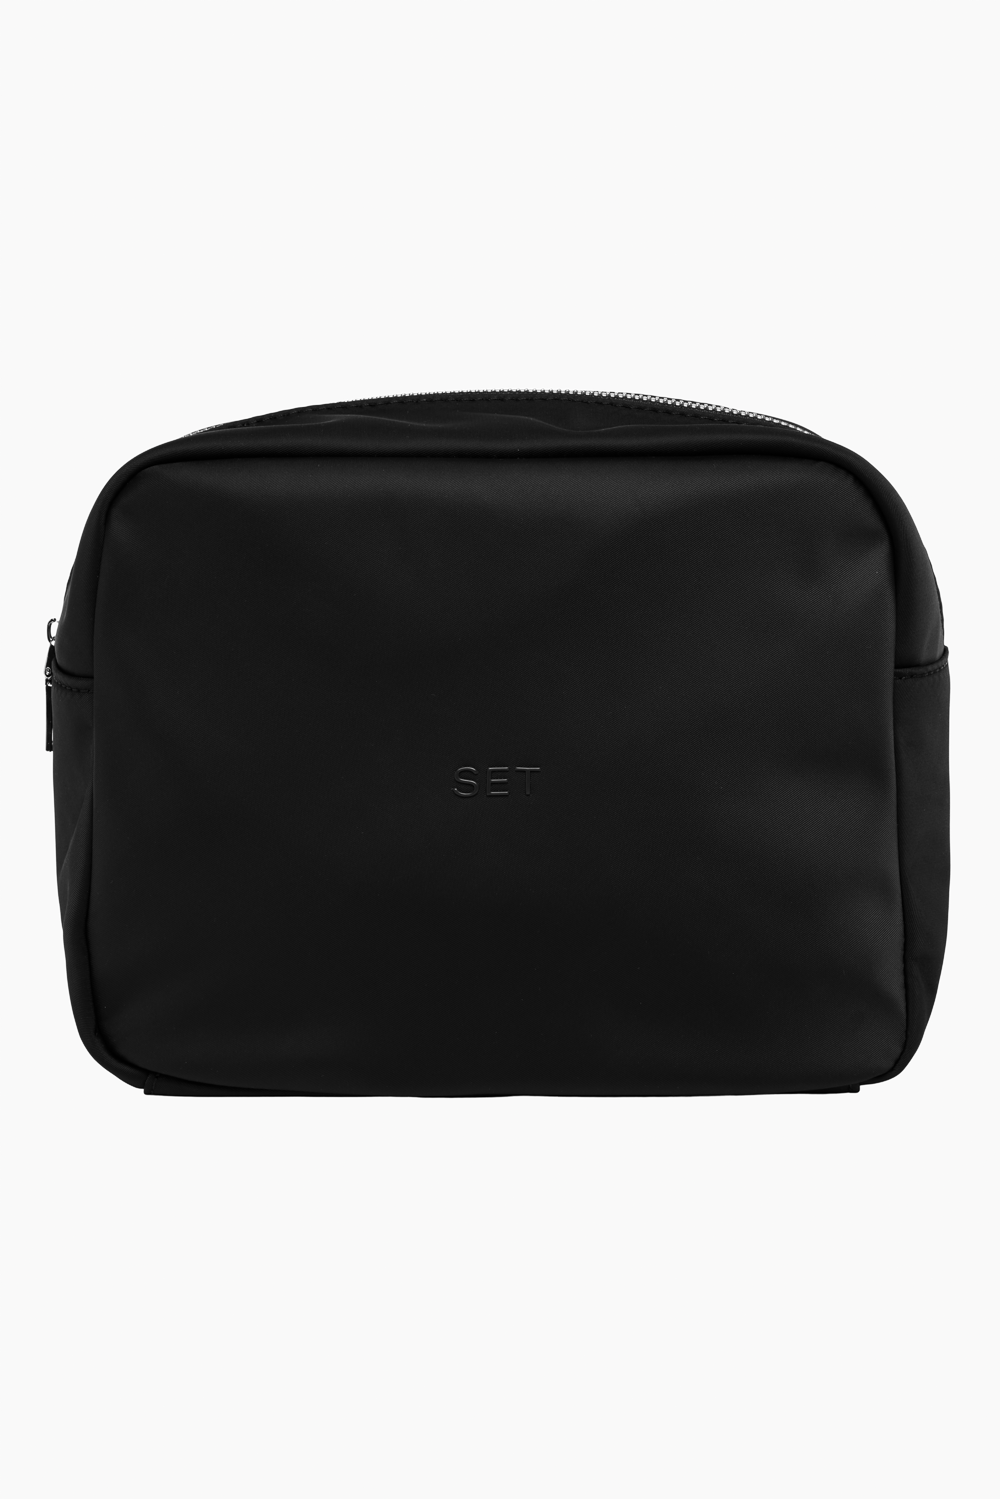 SET™ EVERYTHING BAG IN ONYX